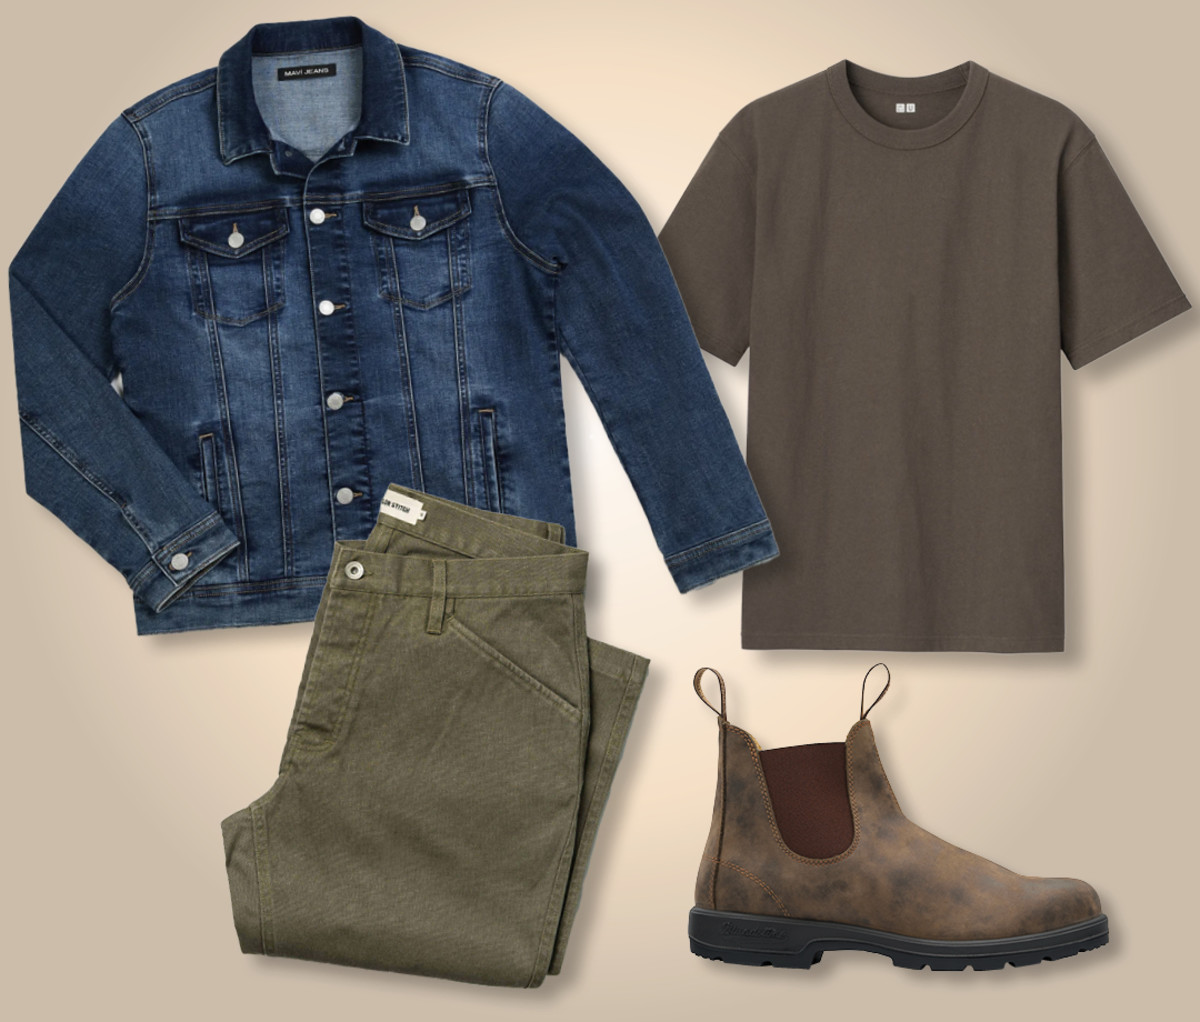 One Boot, Your Rules: How to Style Blundstone #585 Boots - Men's Journal